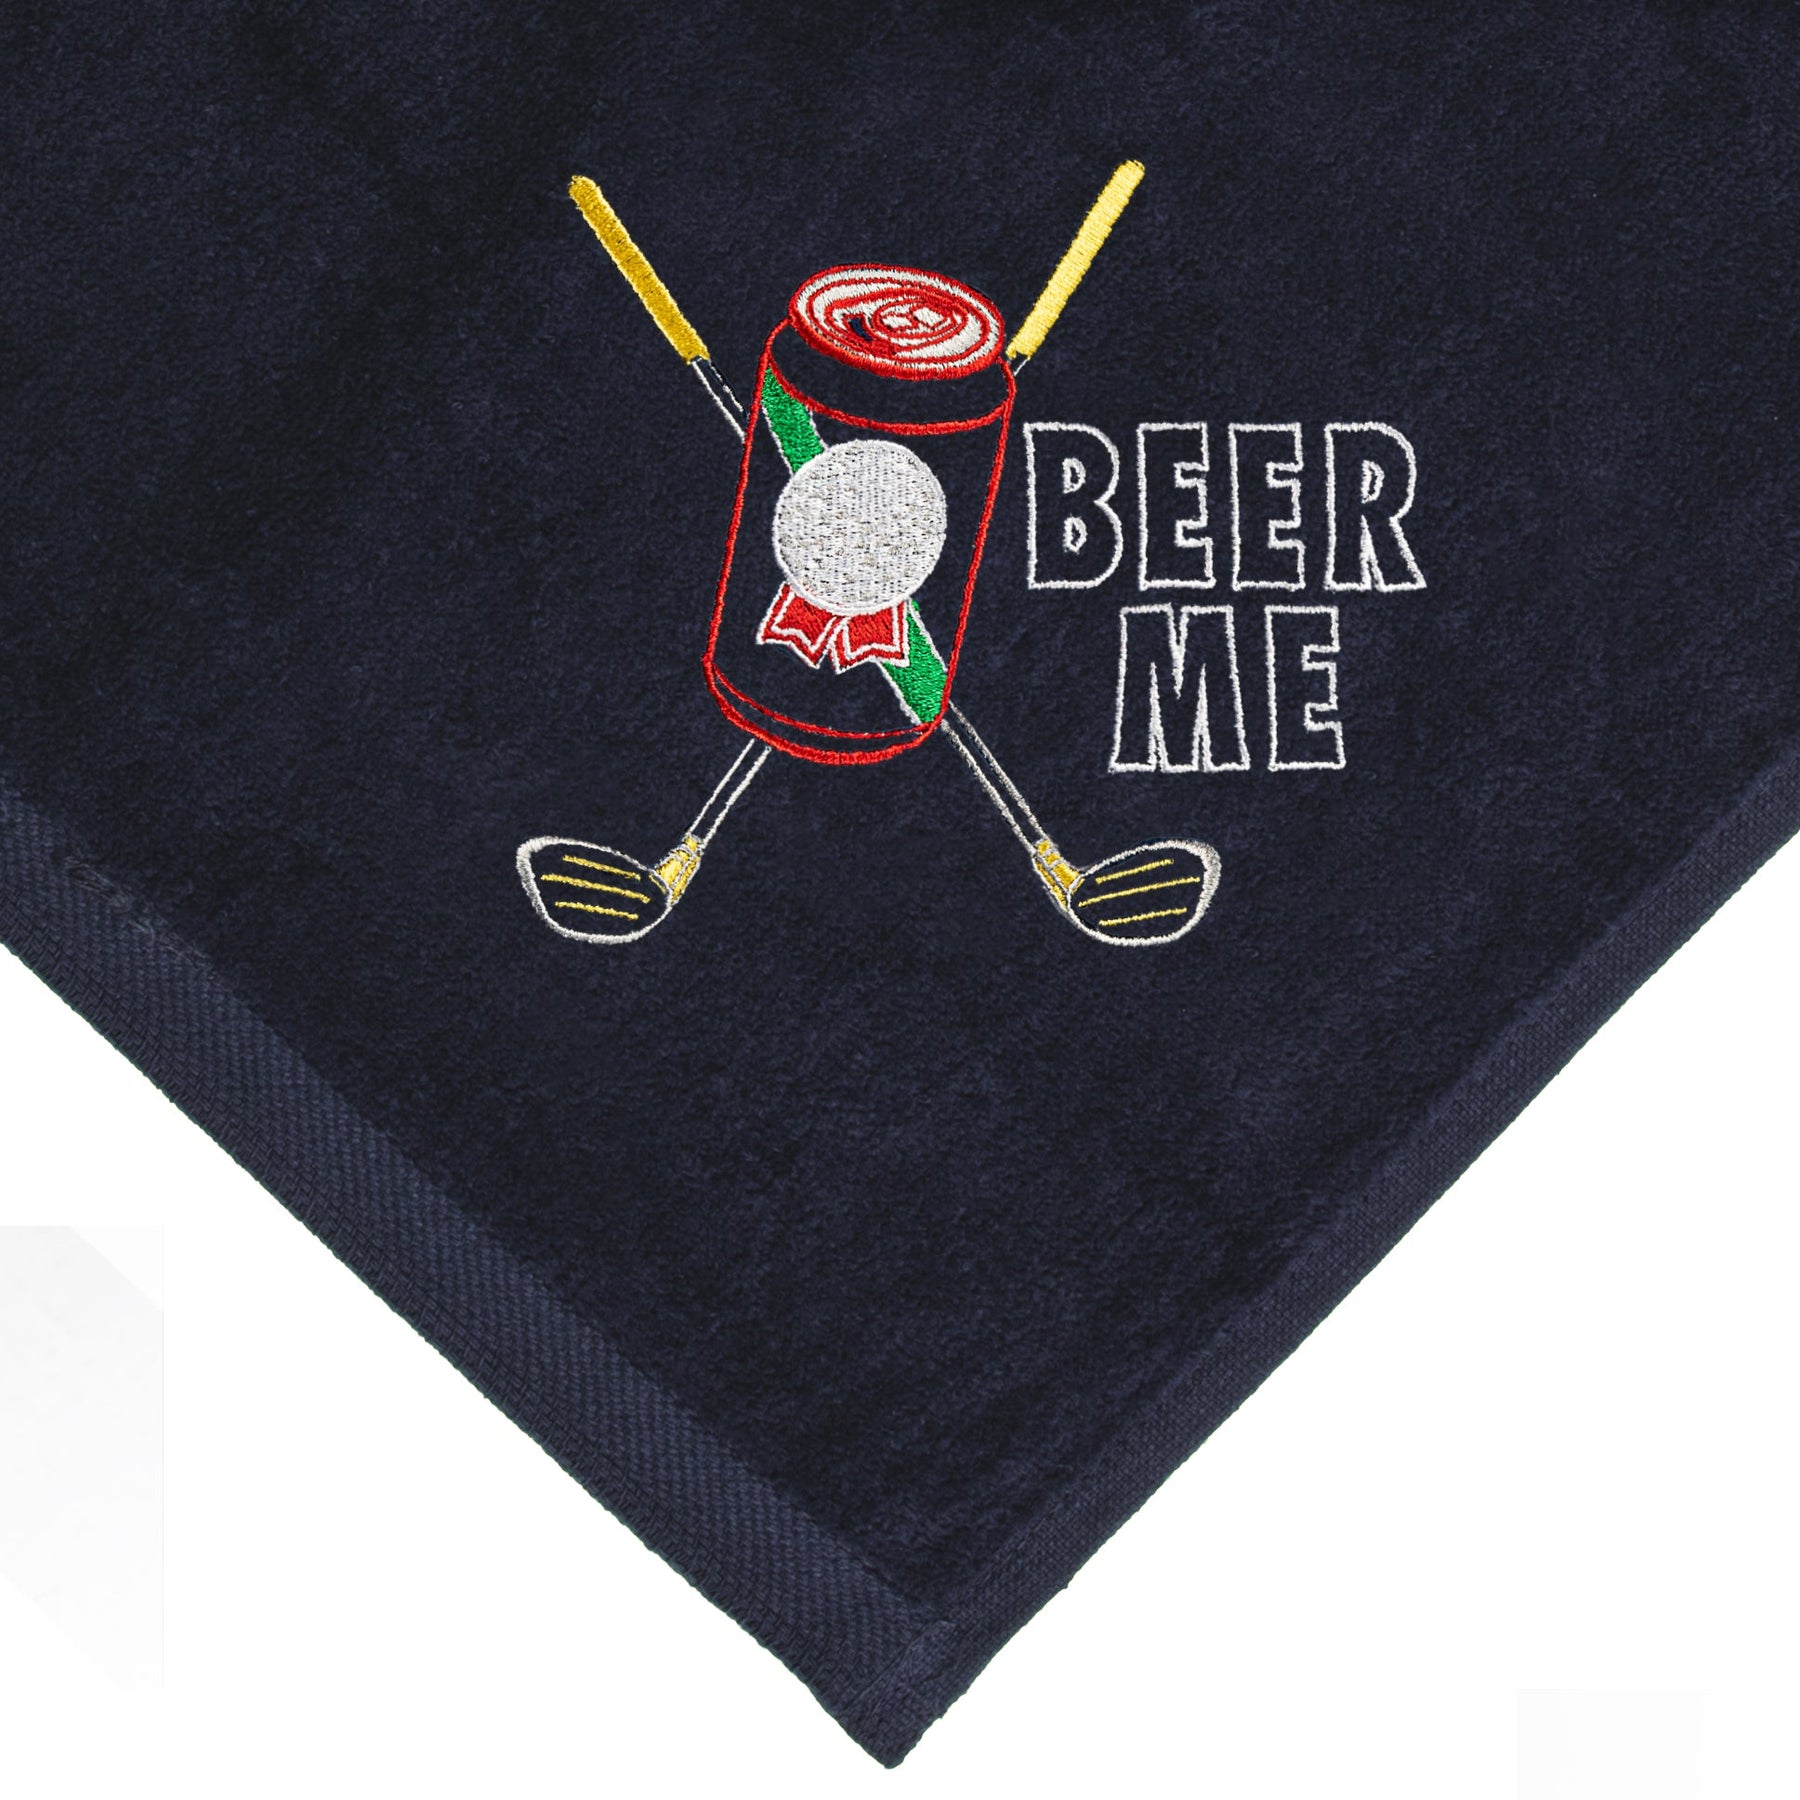 Mato & Hash Golf Towel "Beer Me" Can Design Embroidery - Mato & Hash